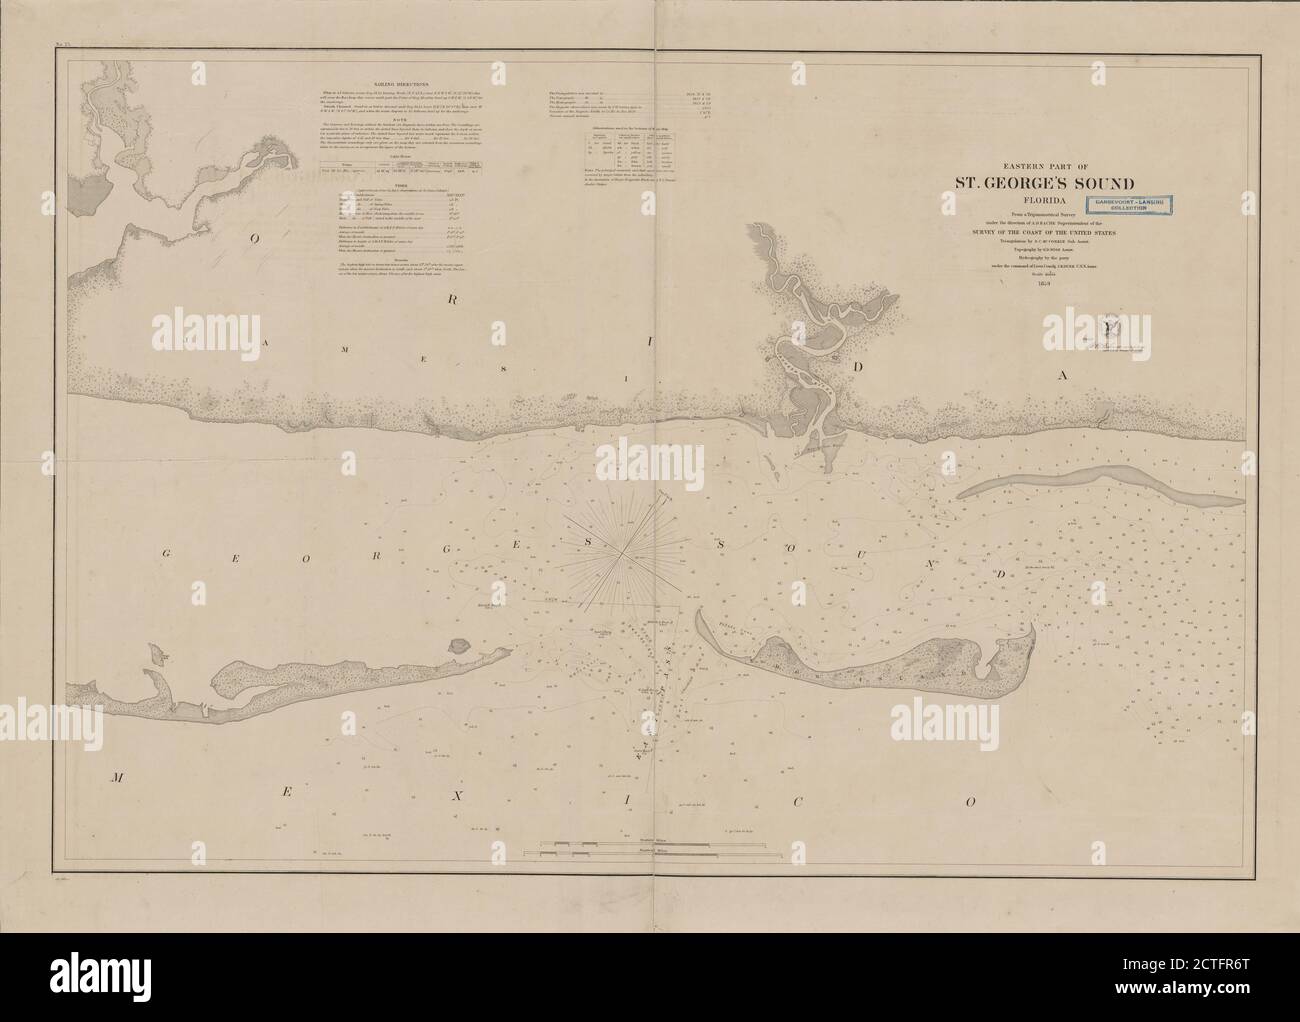 Eastern Part of St. George's Sound, Florida , cartographic, Maps, 1859, Bache, A. D. (Alexander Dallas), 1806-1867, McCorkle, S. C., Wise, George D. (George Douglas), 1831-1898, Palmer, W. R. (William R.), -1862 Stockfoto